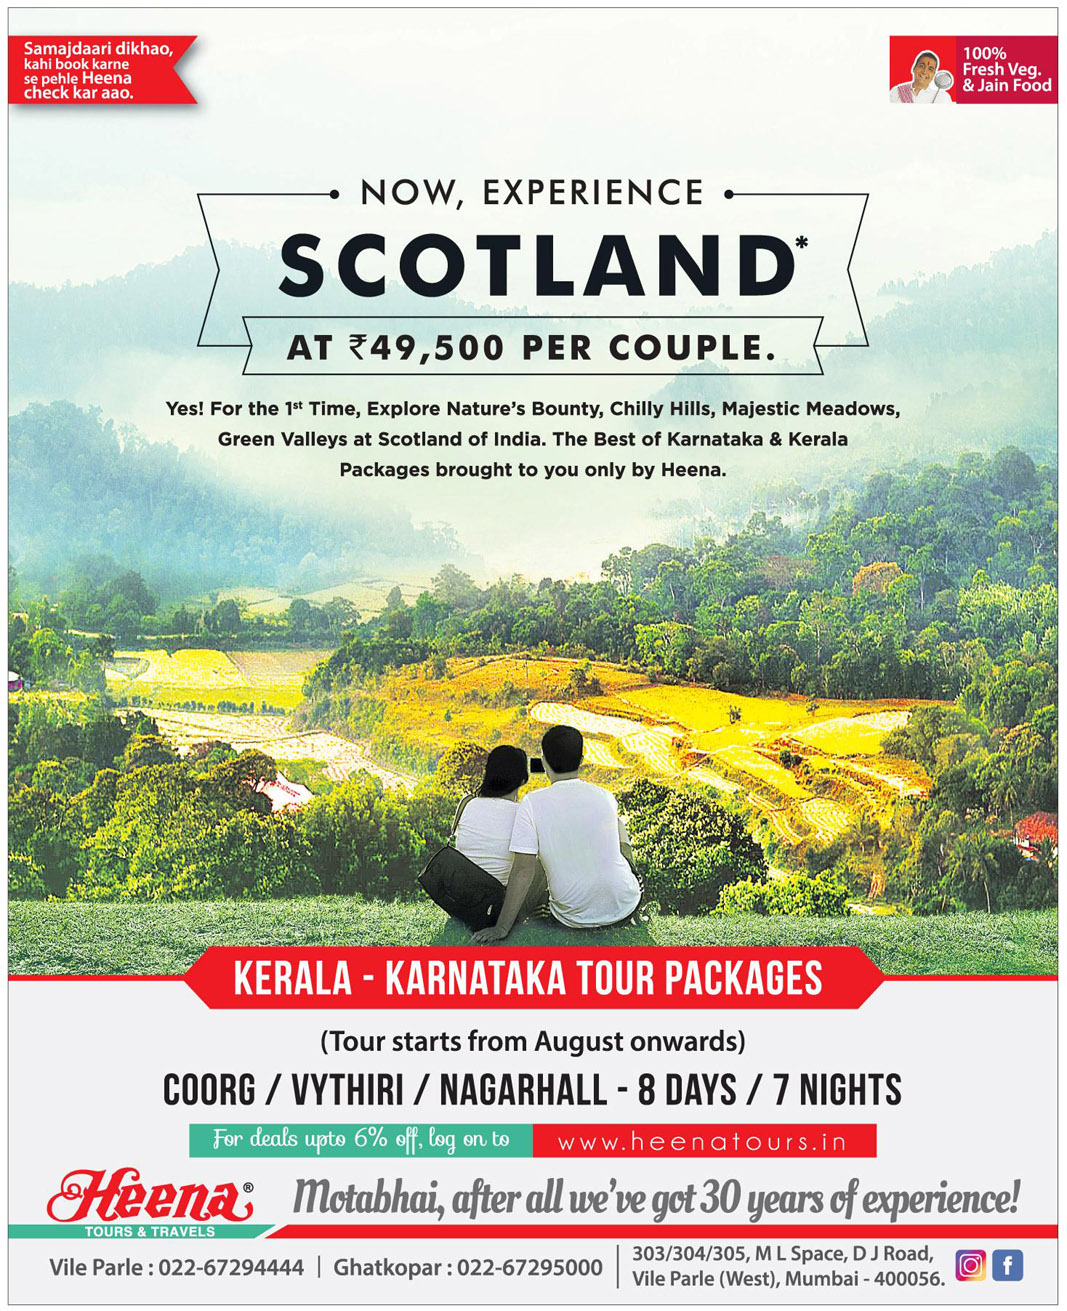 heena tours and travels coorg packages